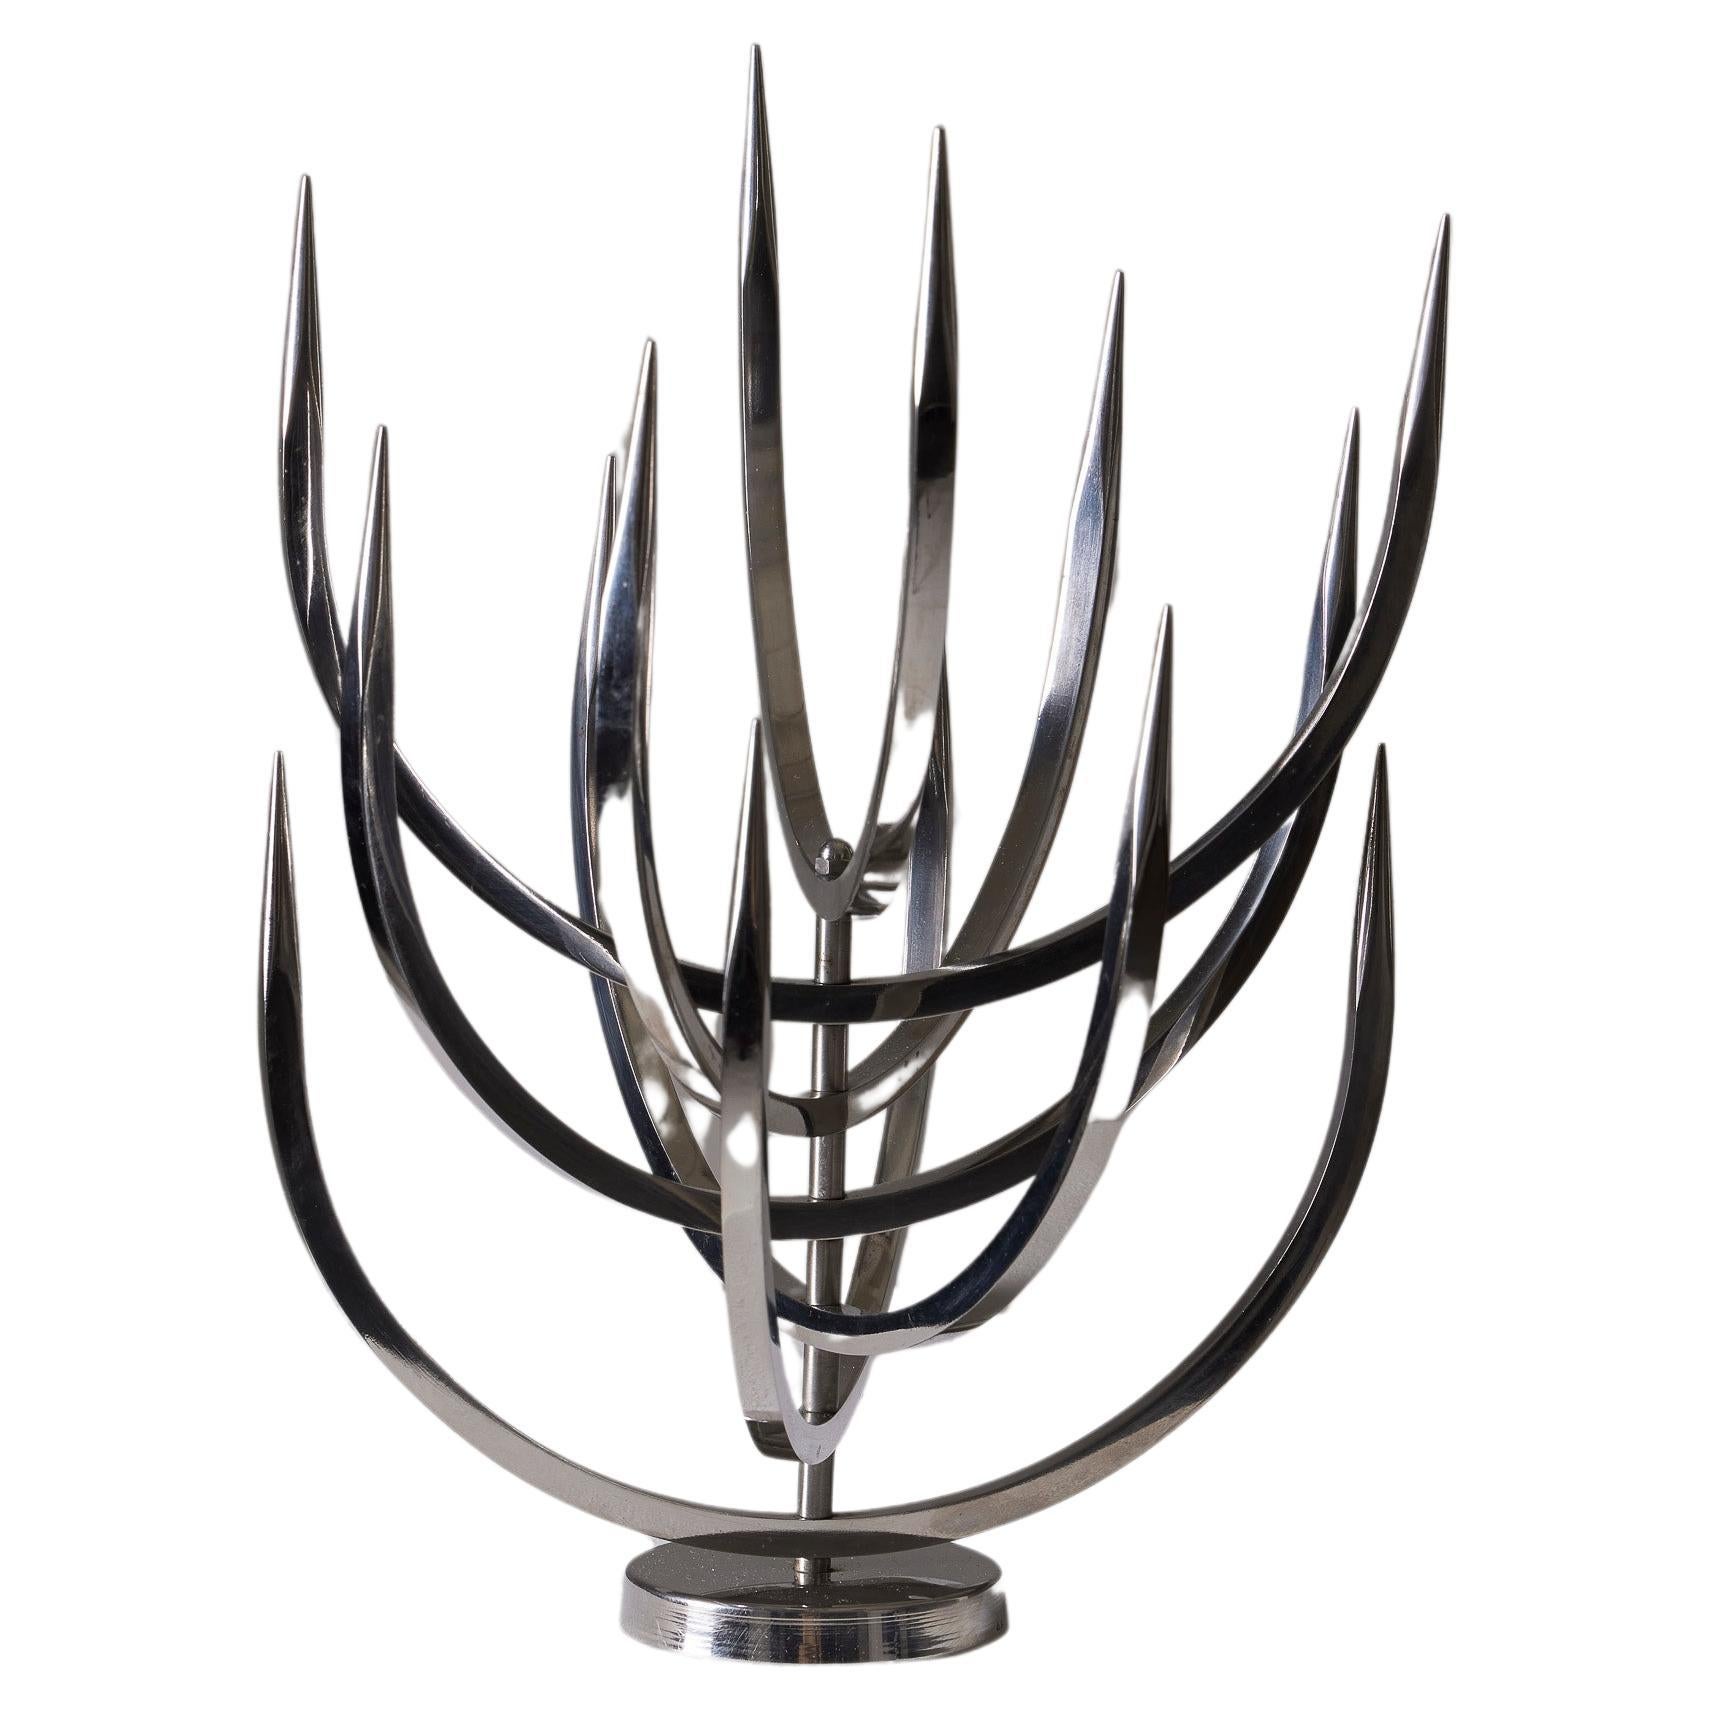  Metal candle holder by Xavier Feal For Sale